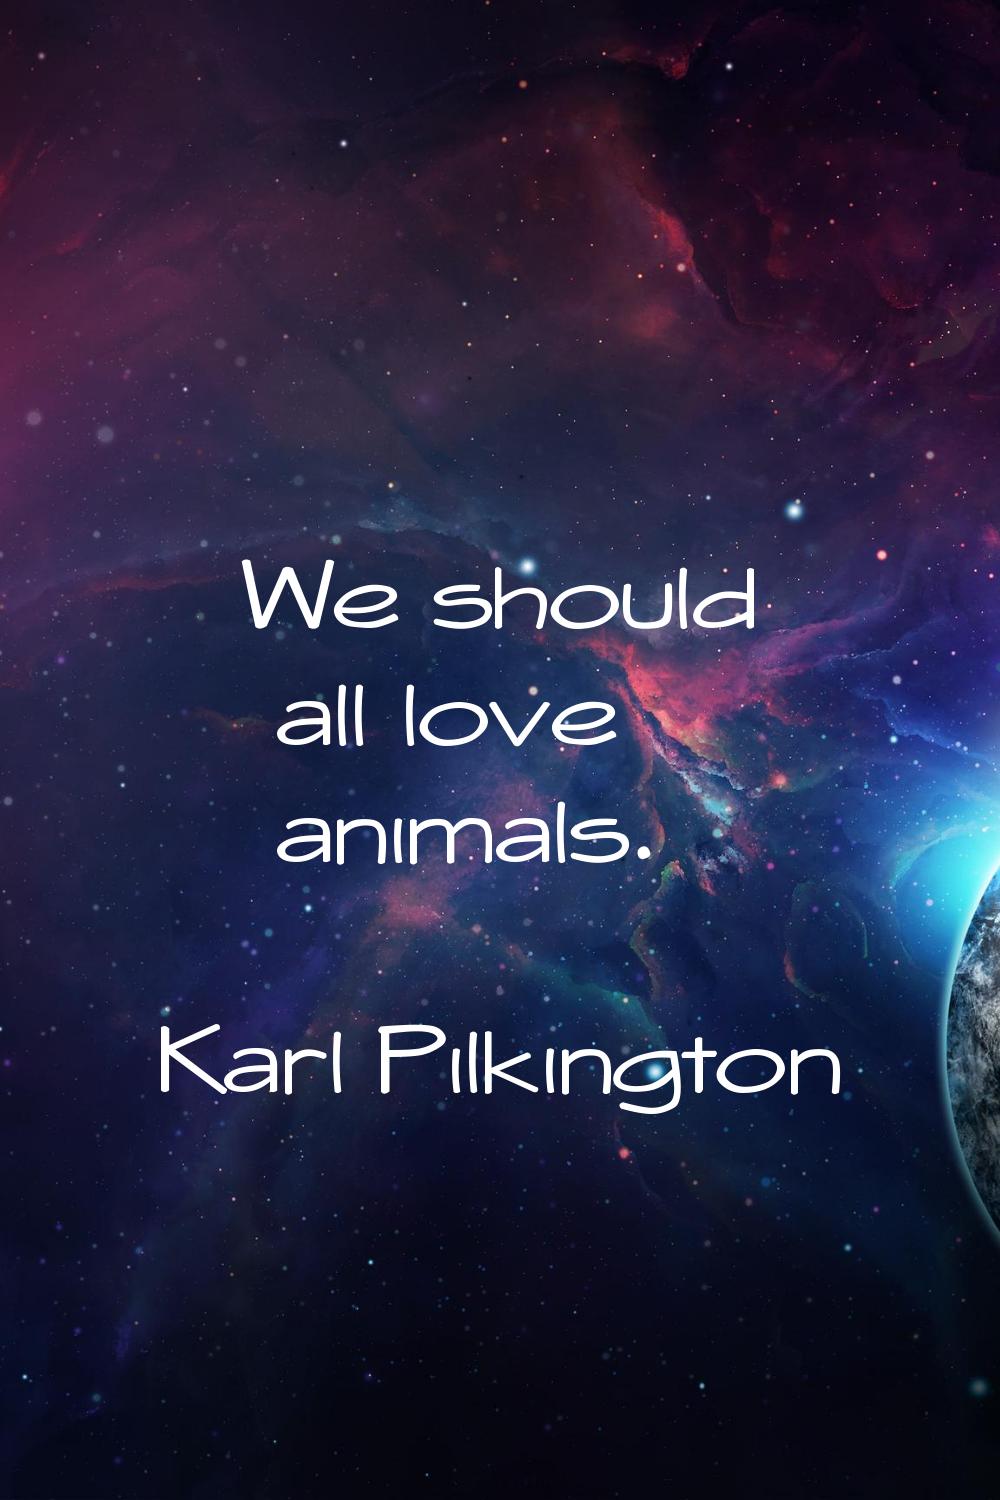 We should all love animals.